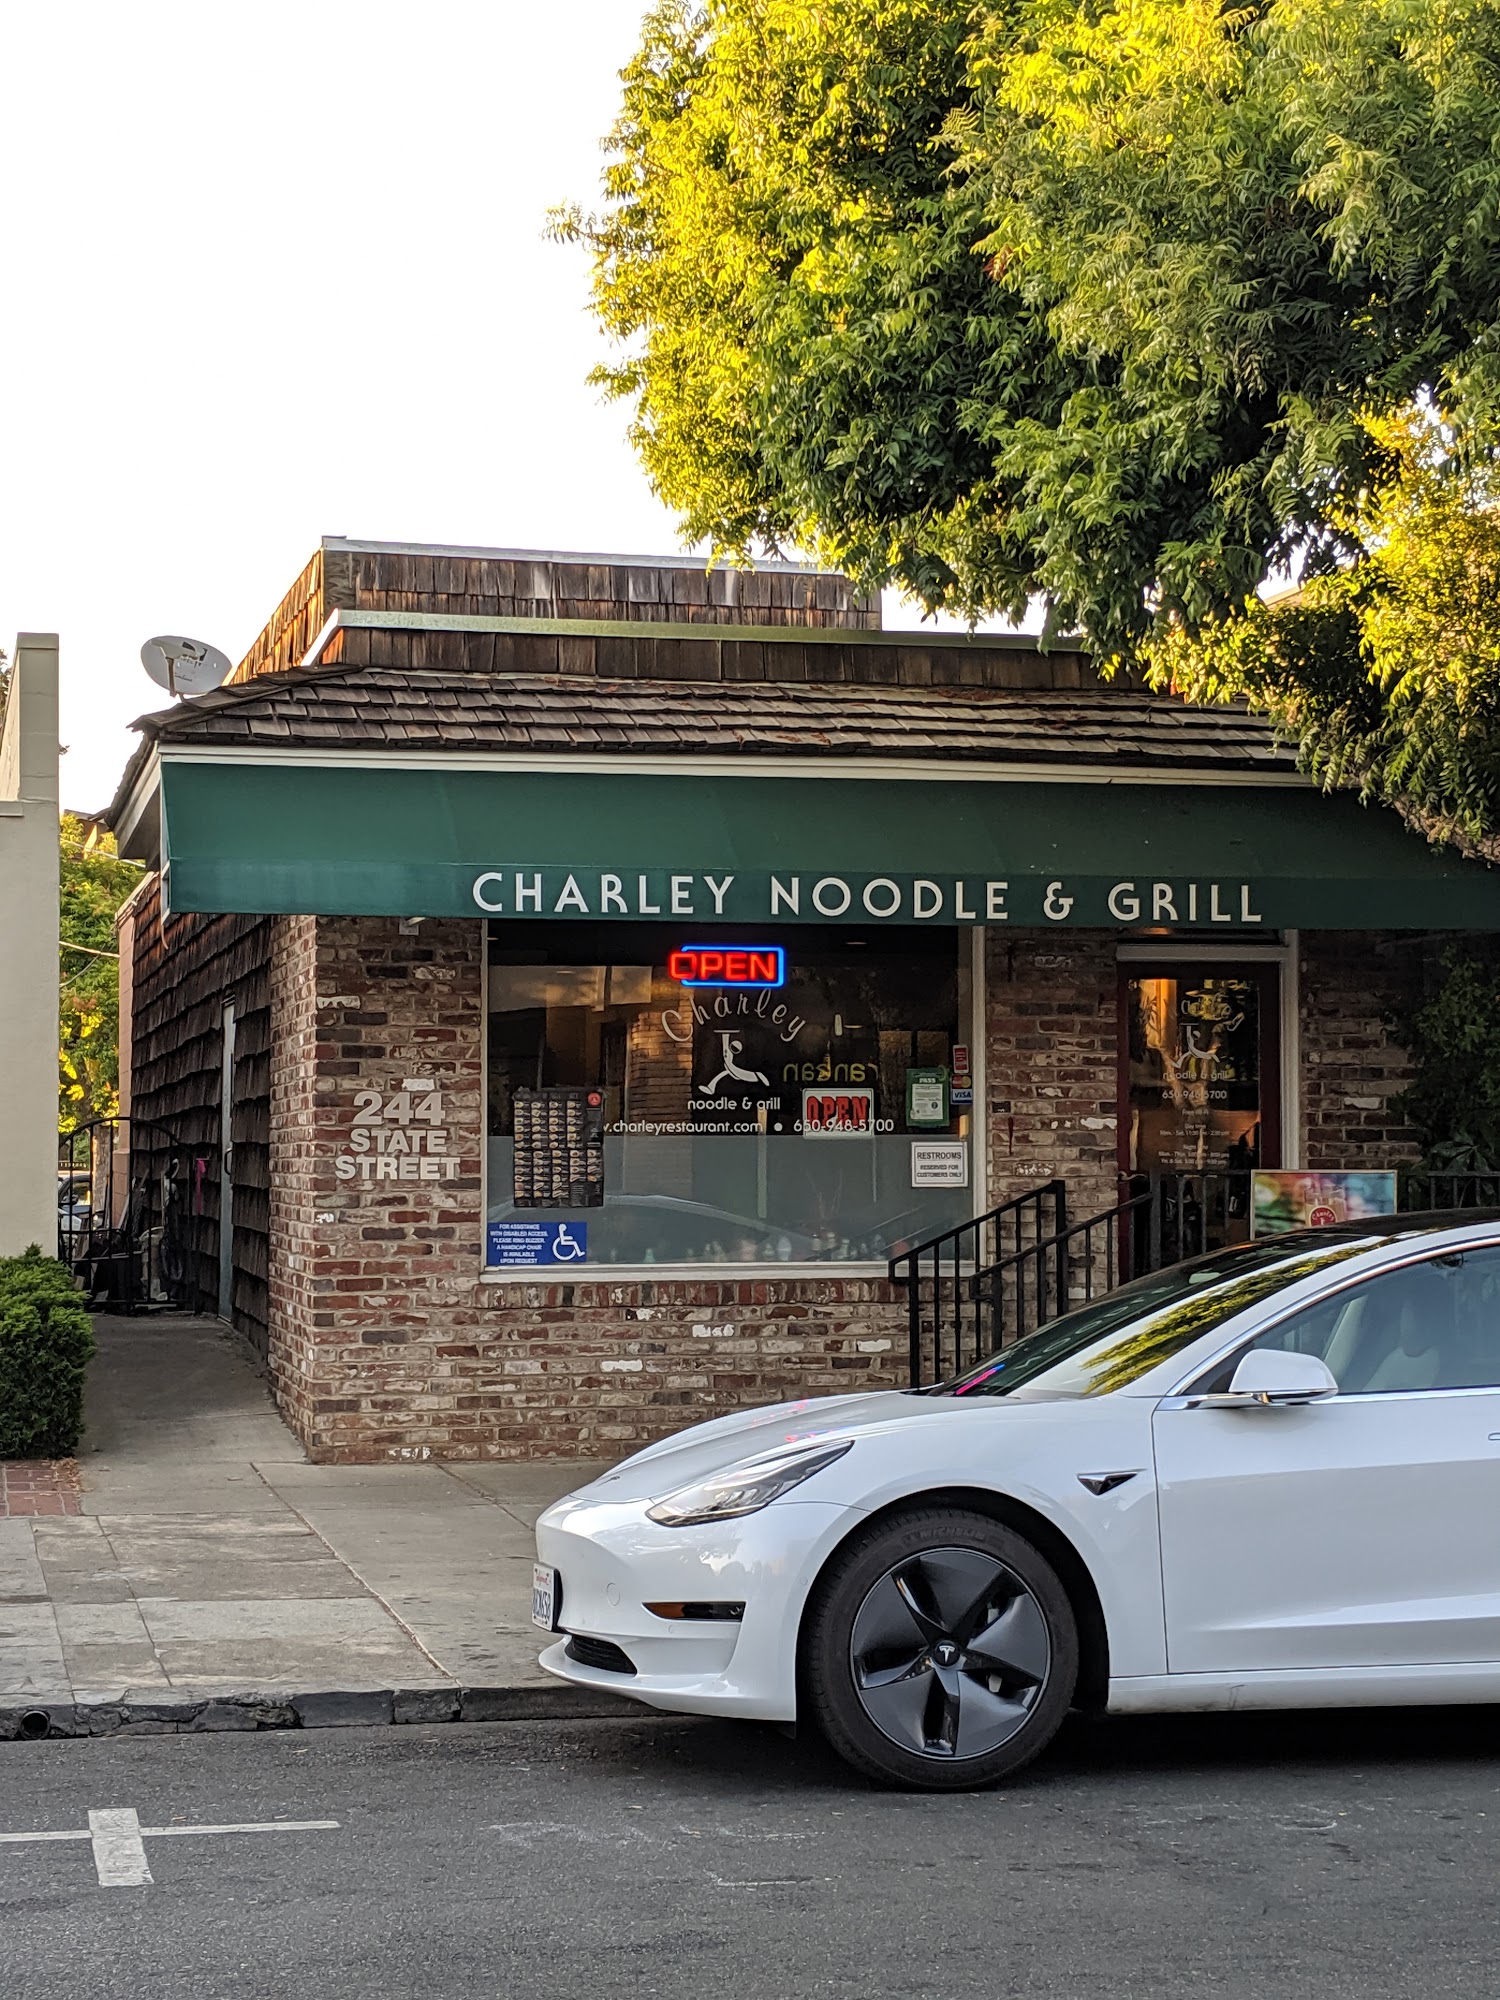 Charley Noodle & Grill